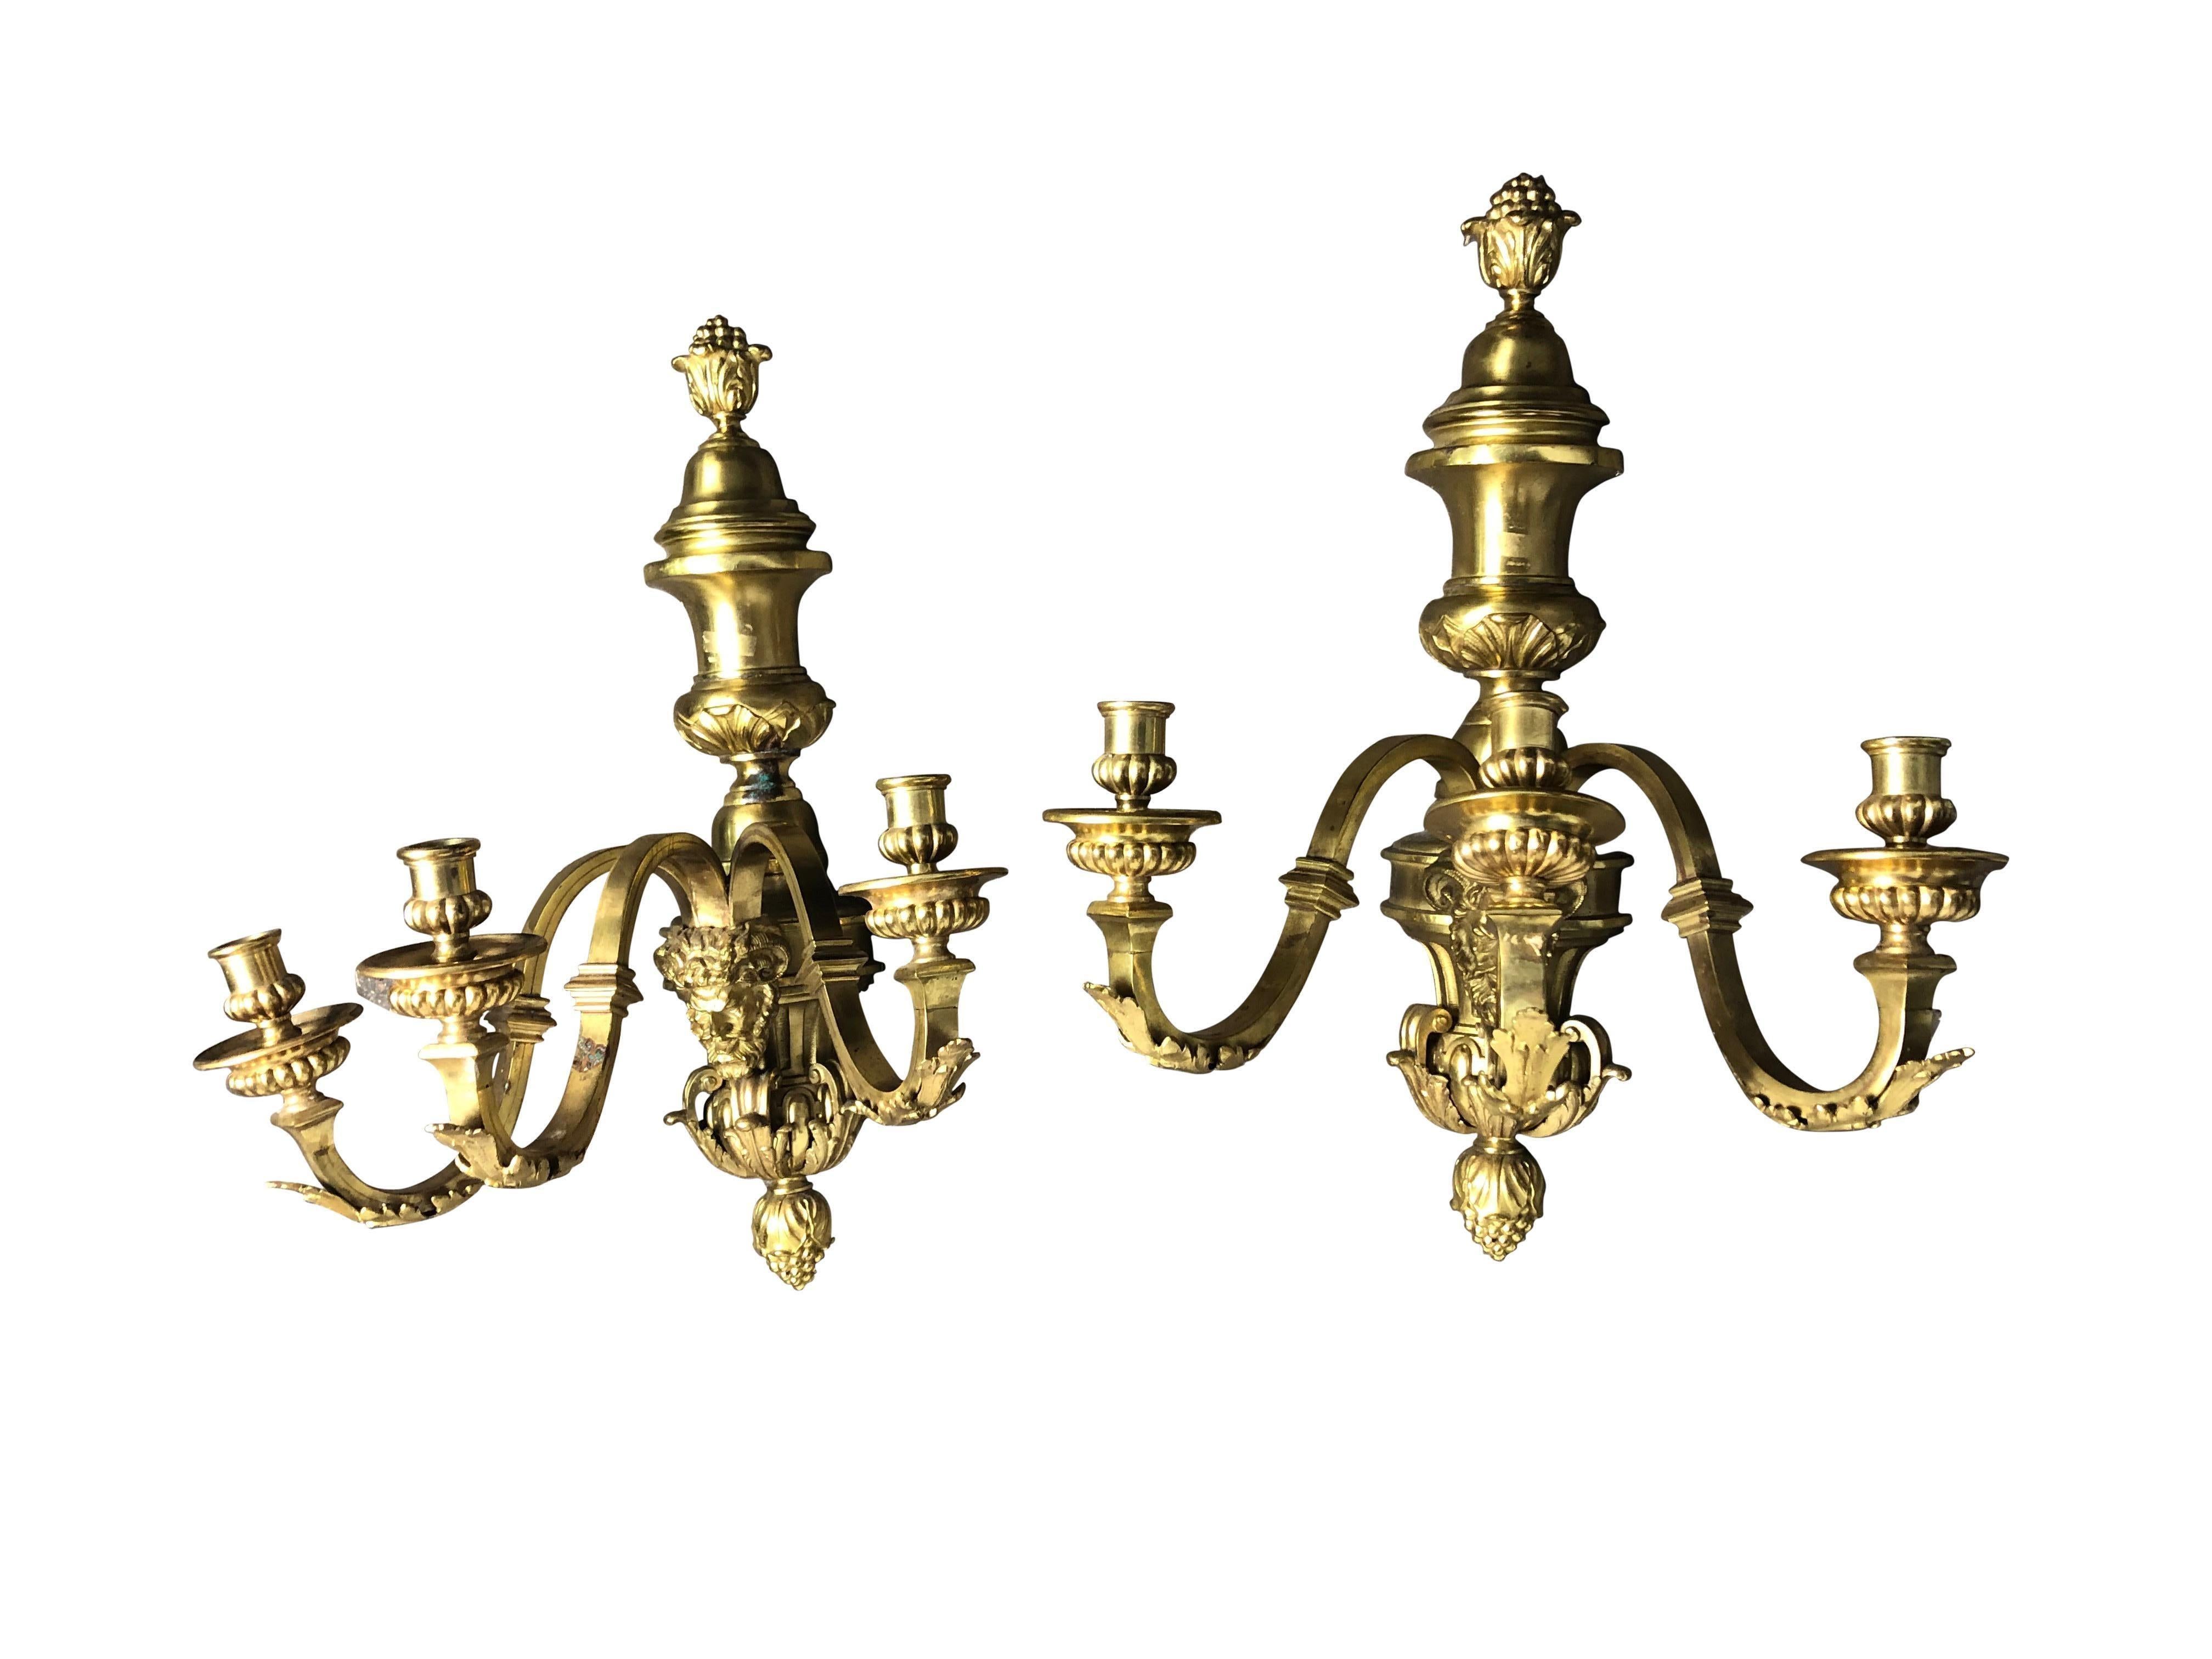 A Pair of French large and heavy gilt bronze three-light sconces, each with a classical man's face. Fleur-de-lis bracket design. Fine quality casting and bright polished gold patina with lacquered finish. Small areas of aged patina which add to the